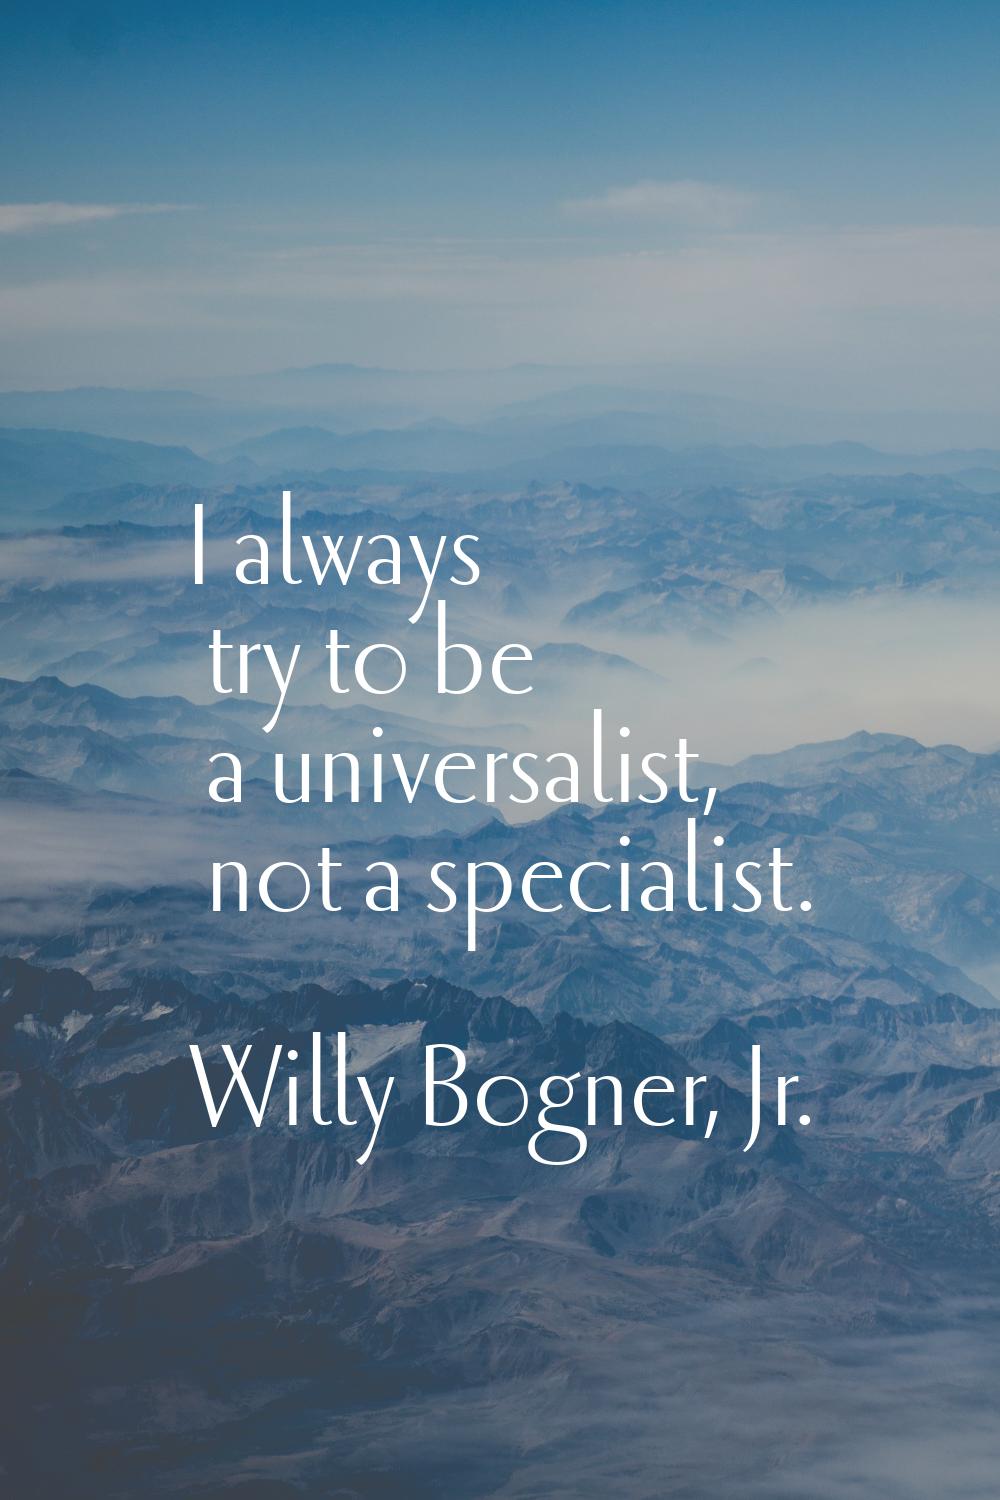 I always try to be a universalist, not a specialist.